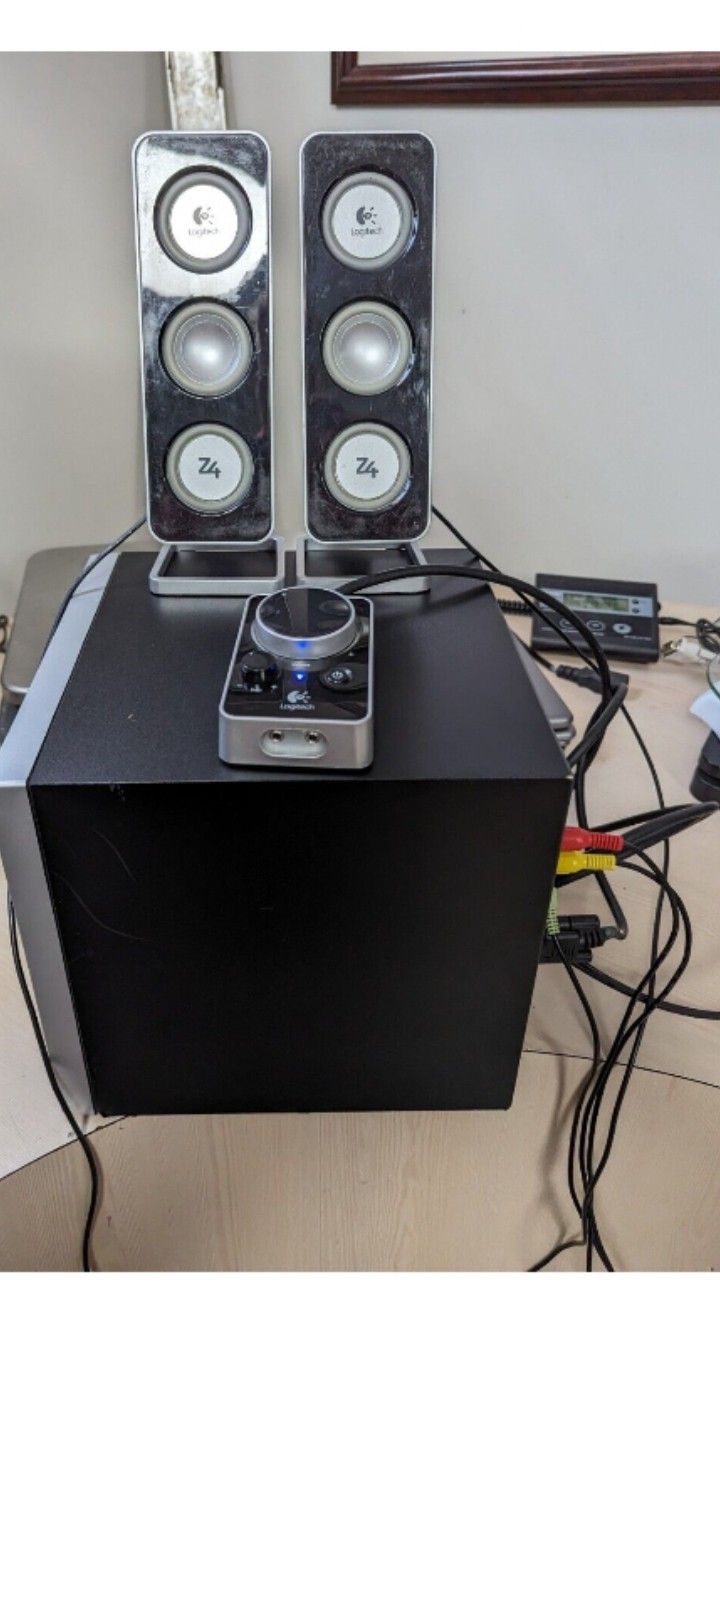 Logitec Computer Speakers With Subwoofer